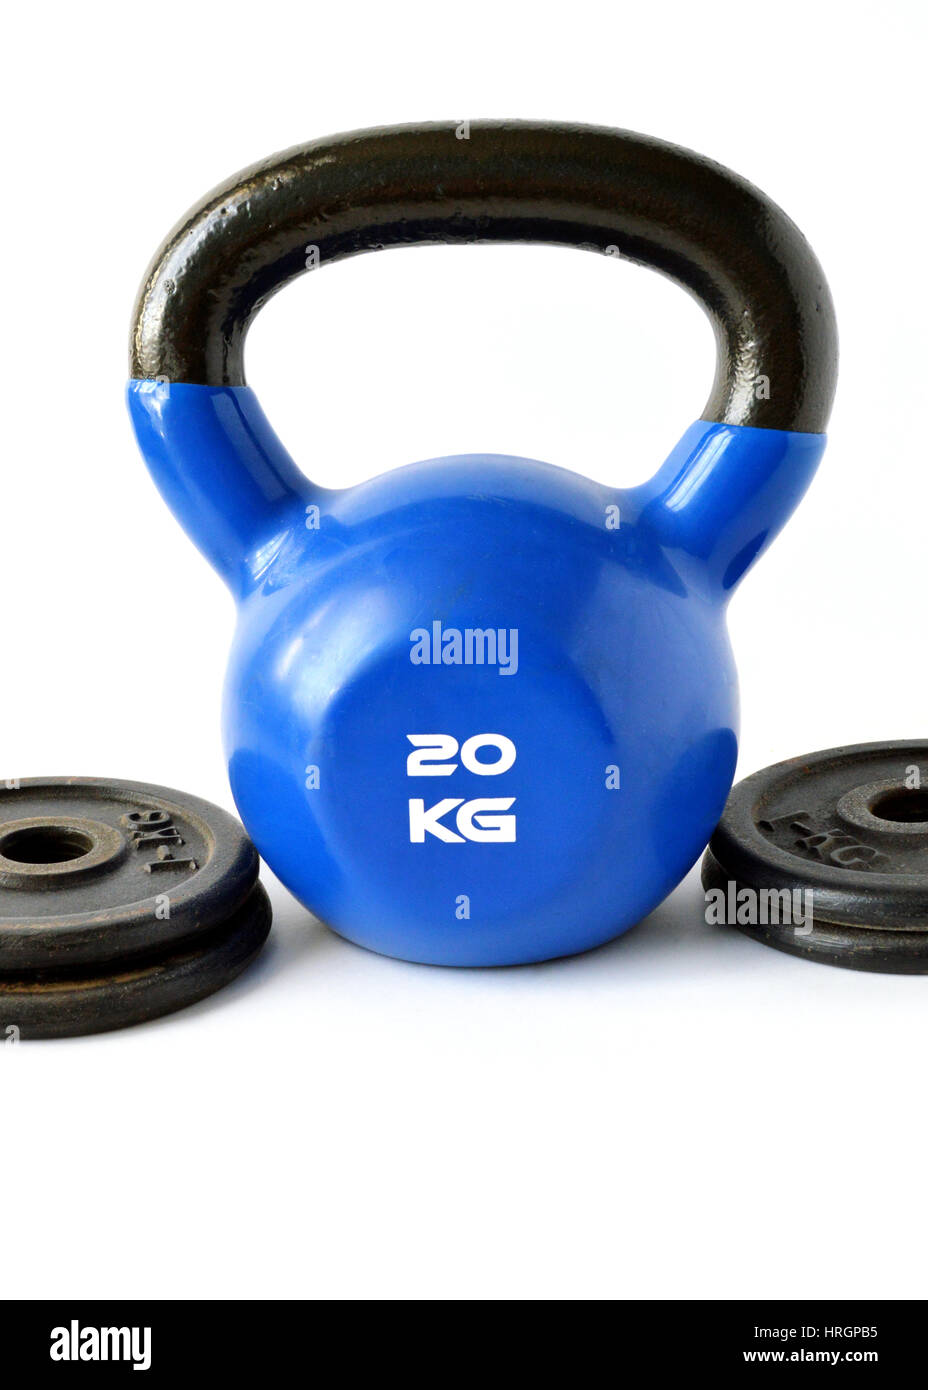 Tools for bodybuilding, fitness and crossfit. Weight and kettlebell. Stock Photo